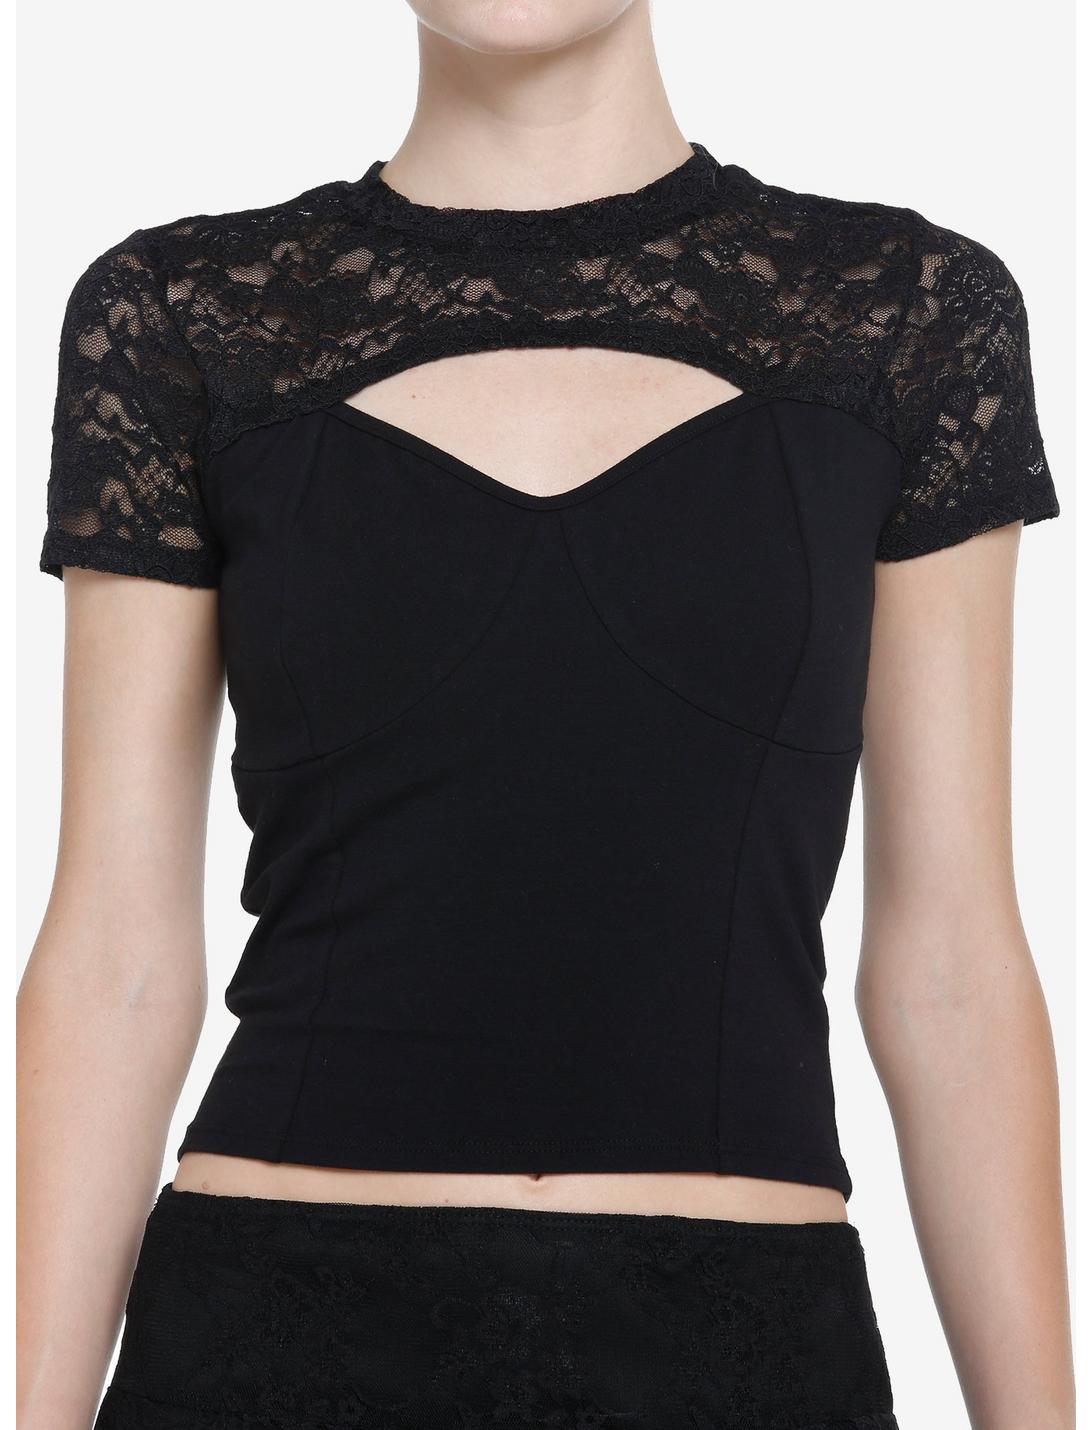 Thorn & Fable Black Lace Cutout Girls Top, ROSE, hi-res